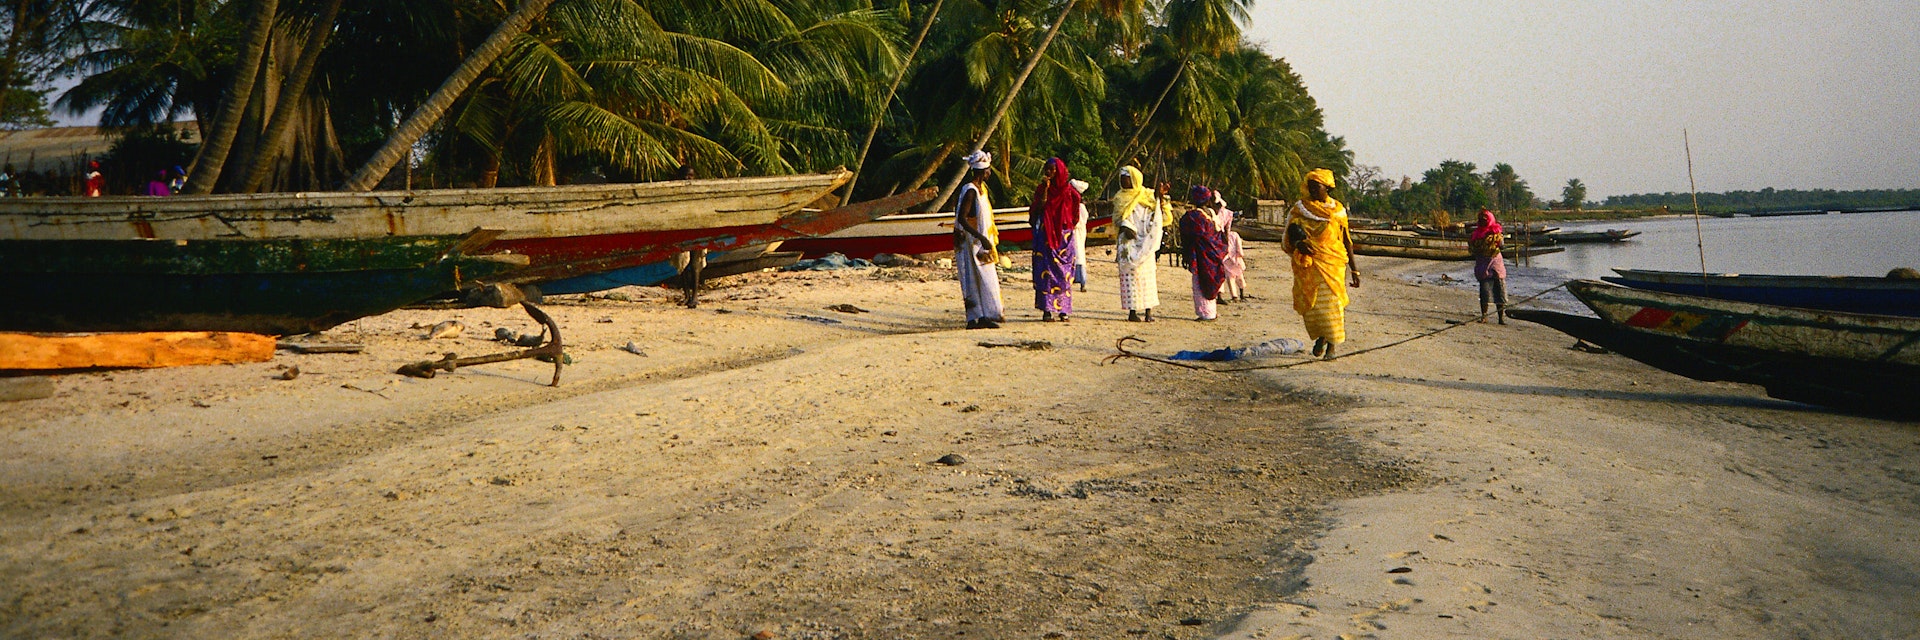 Women traders wait on the beach for a small boat to ferry them across to the island of Carabane - Casamance